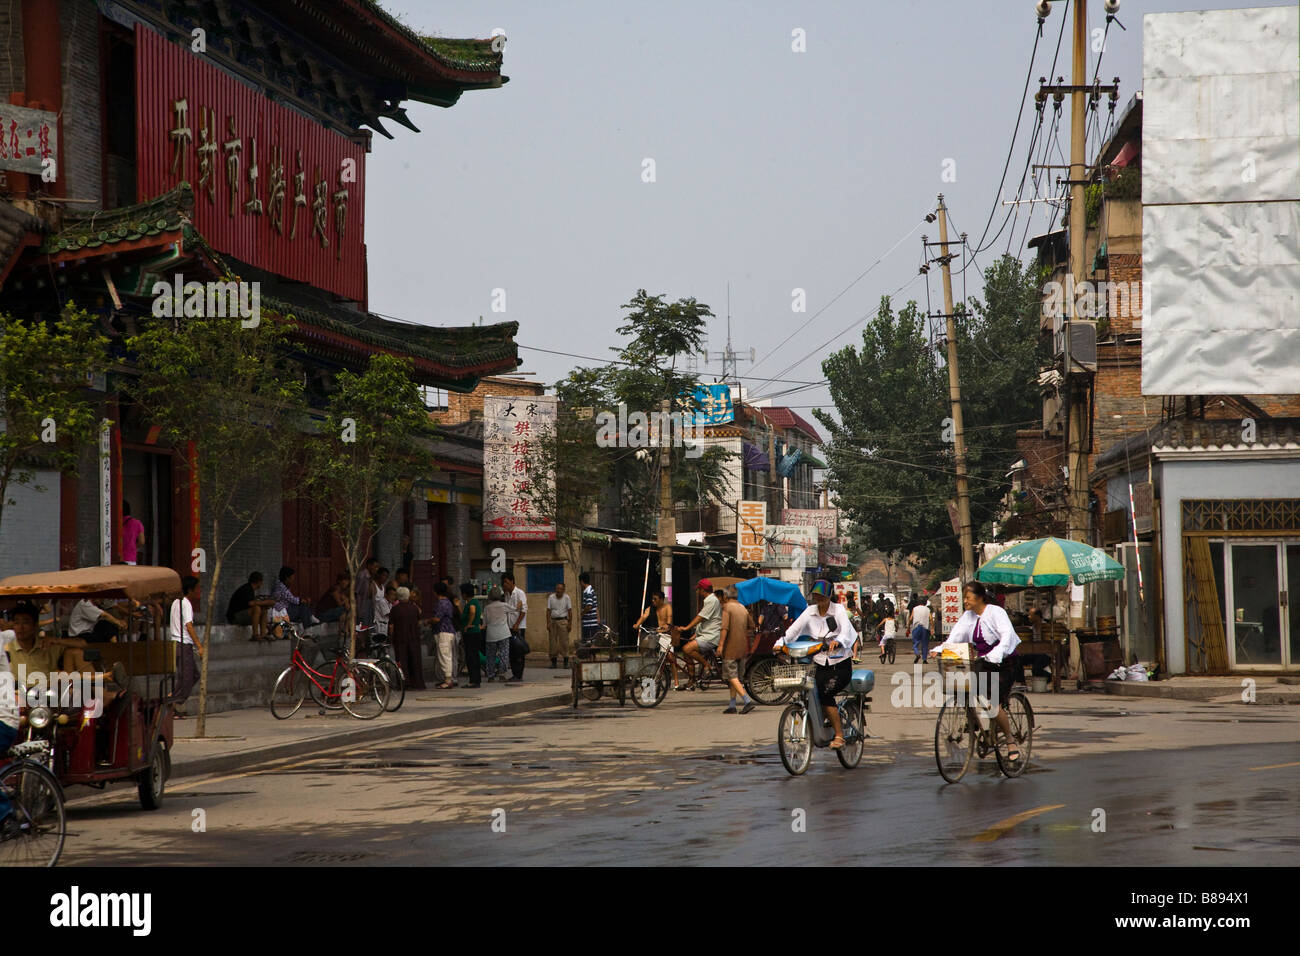 Historical center of Kaifeng, ancient capital of China during the Song dynasty, famed for its jewish community. Stock Photo